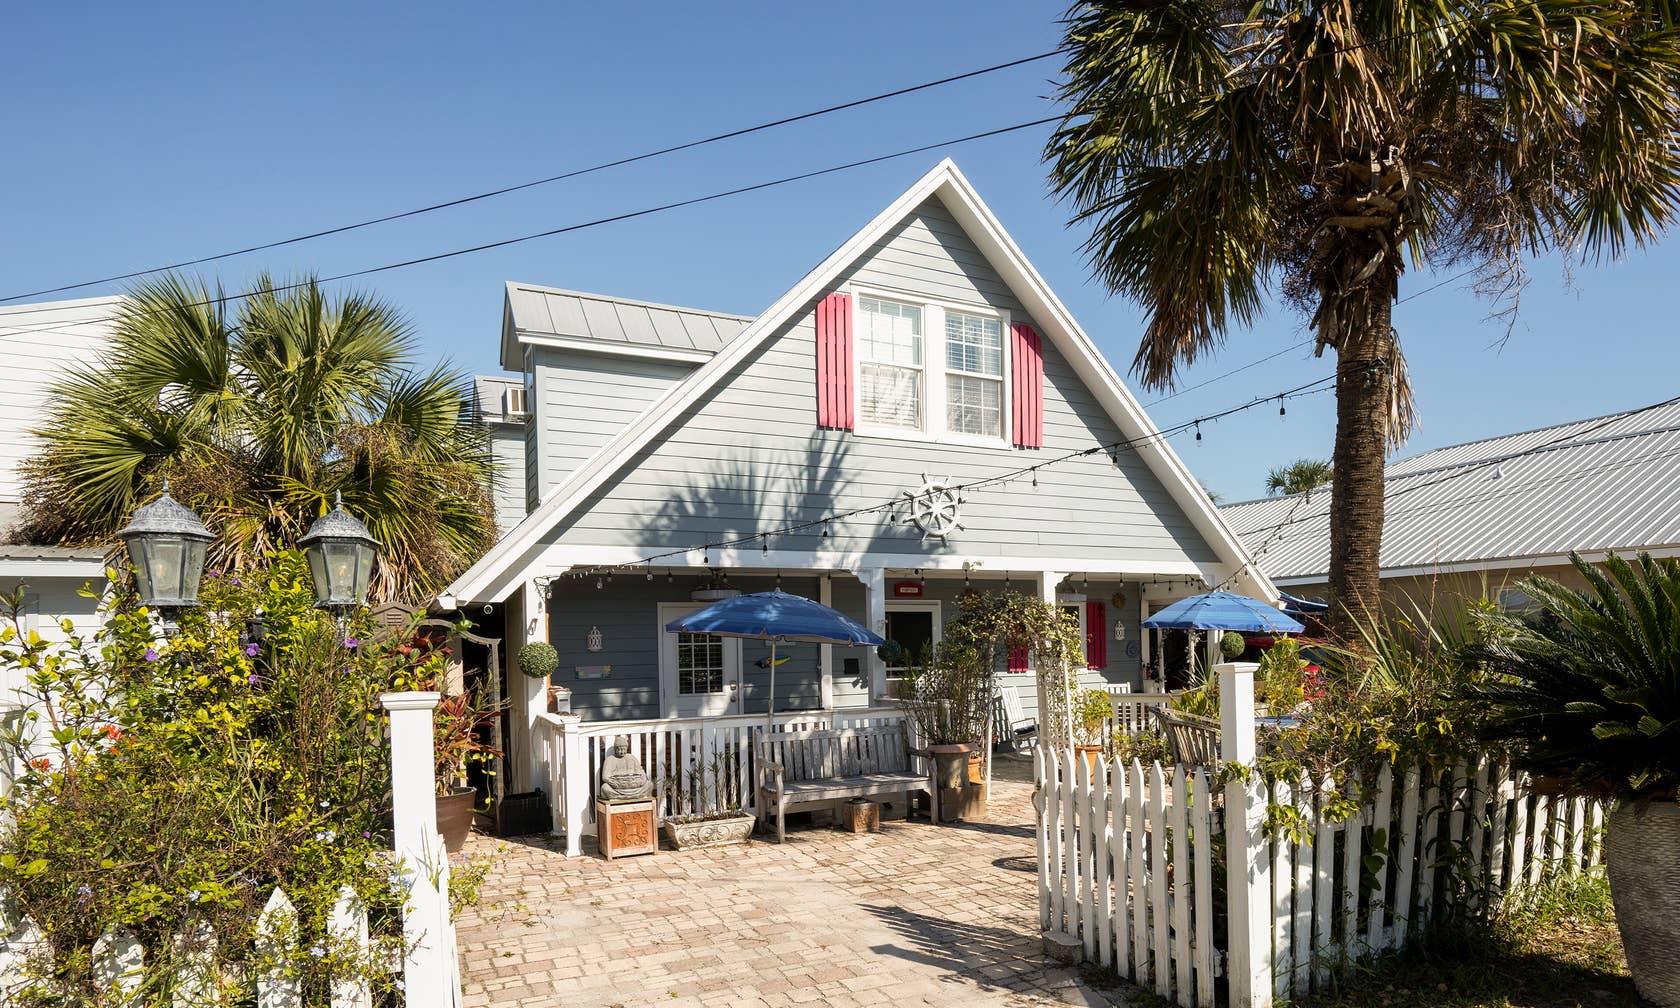 St. Augustine Beach House Rentals   Cottage and House Rentals   Airbnb